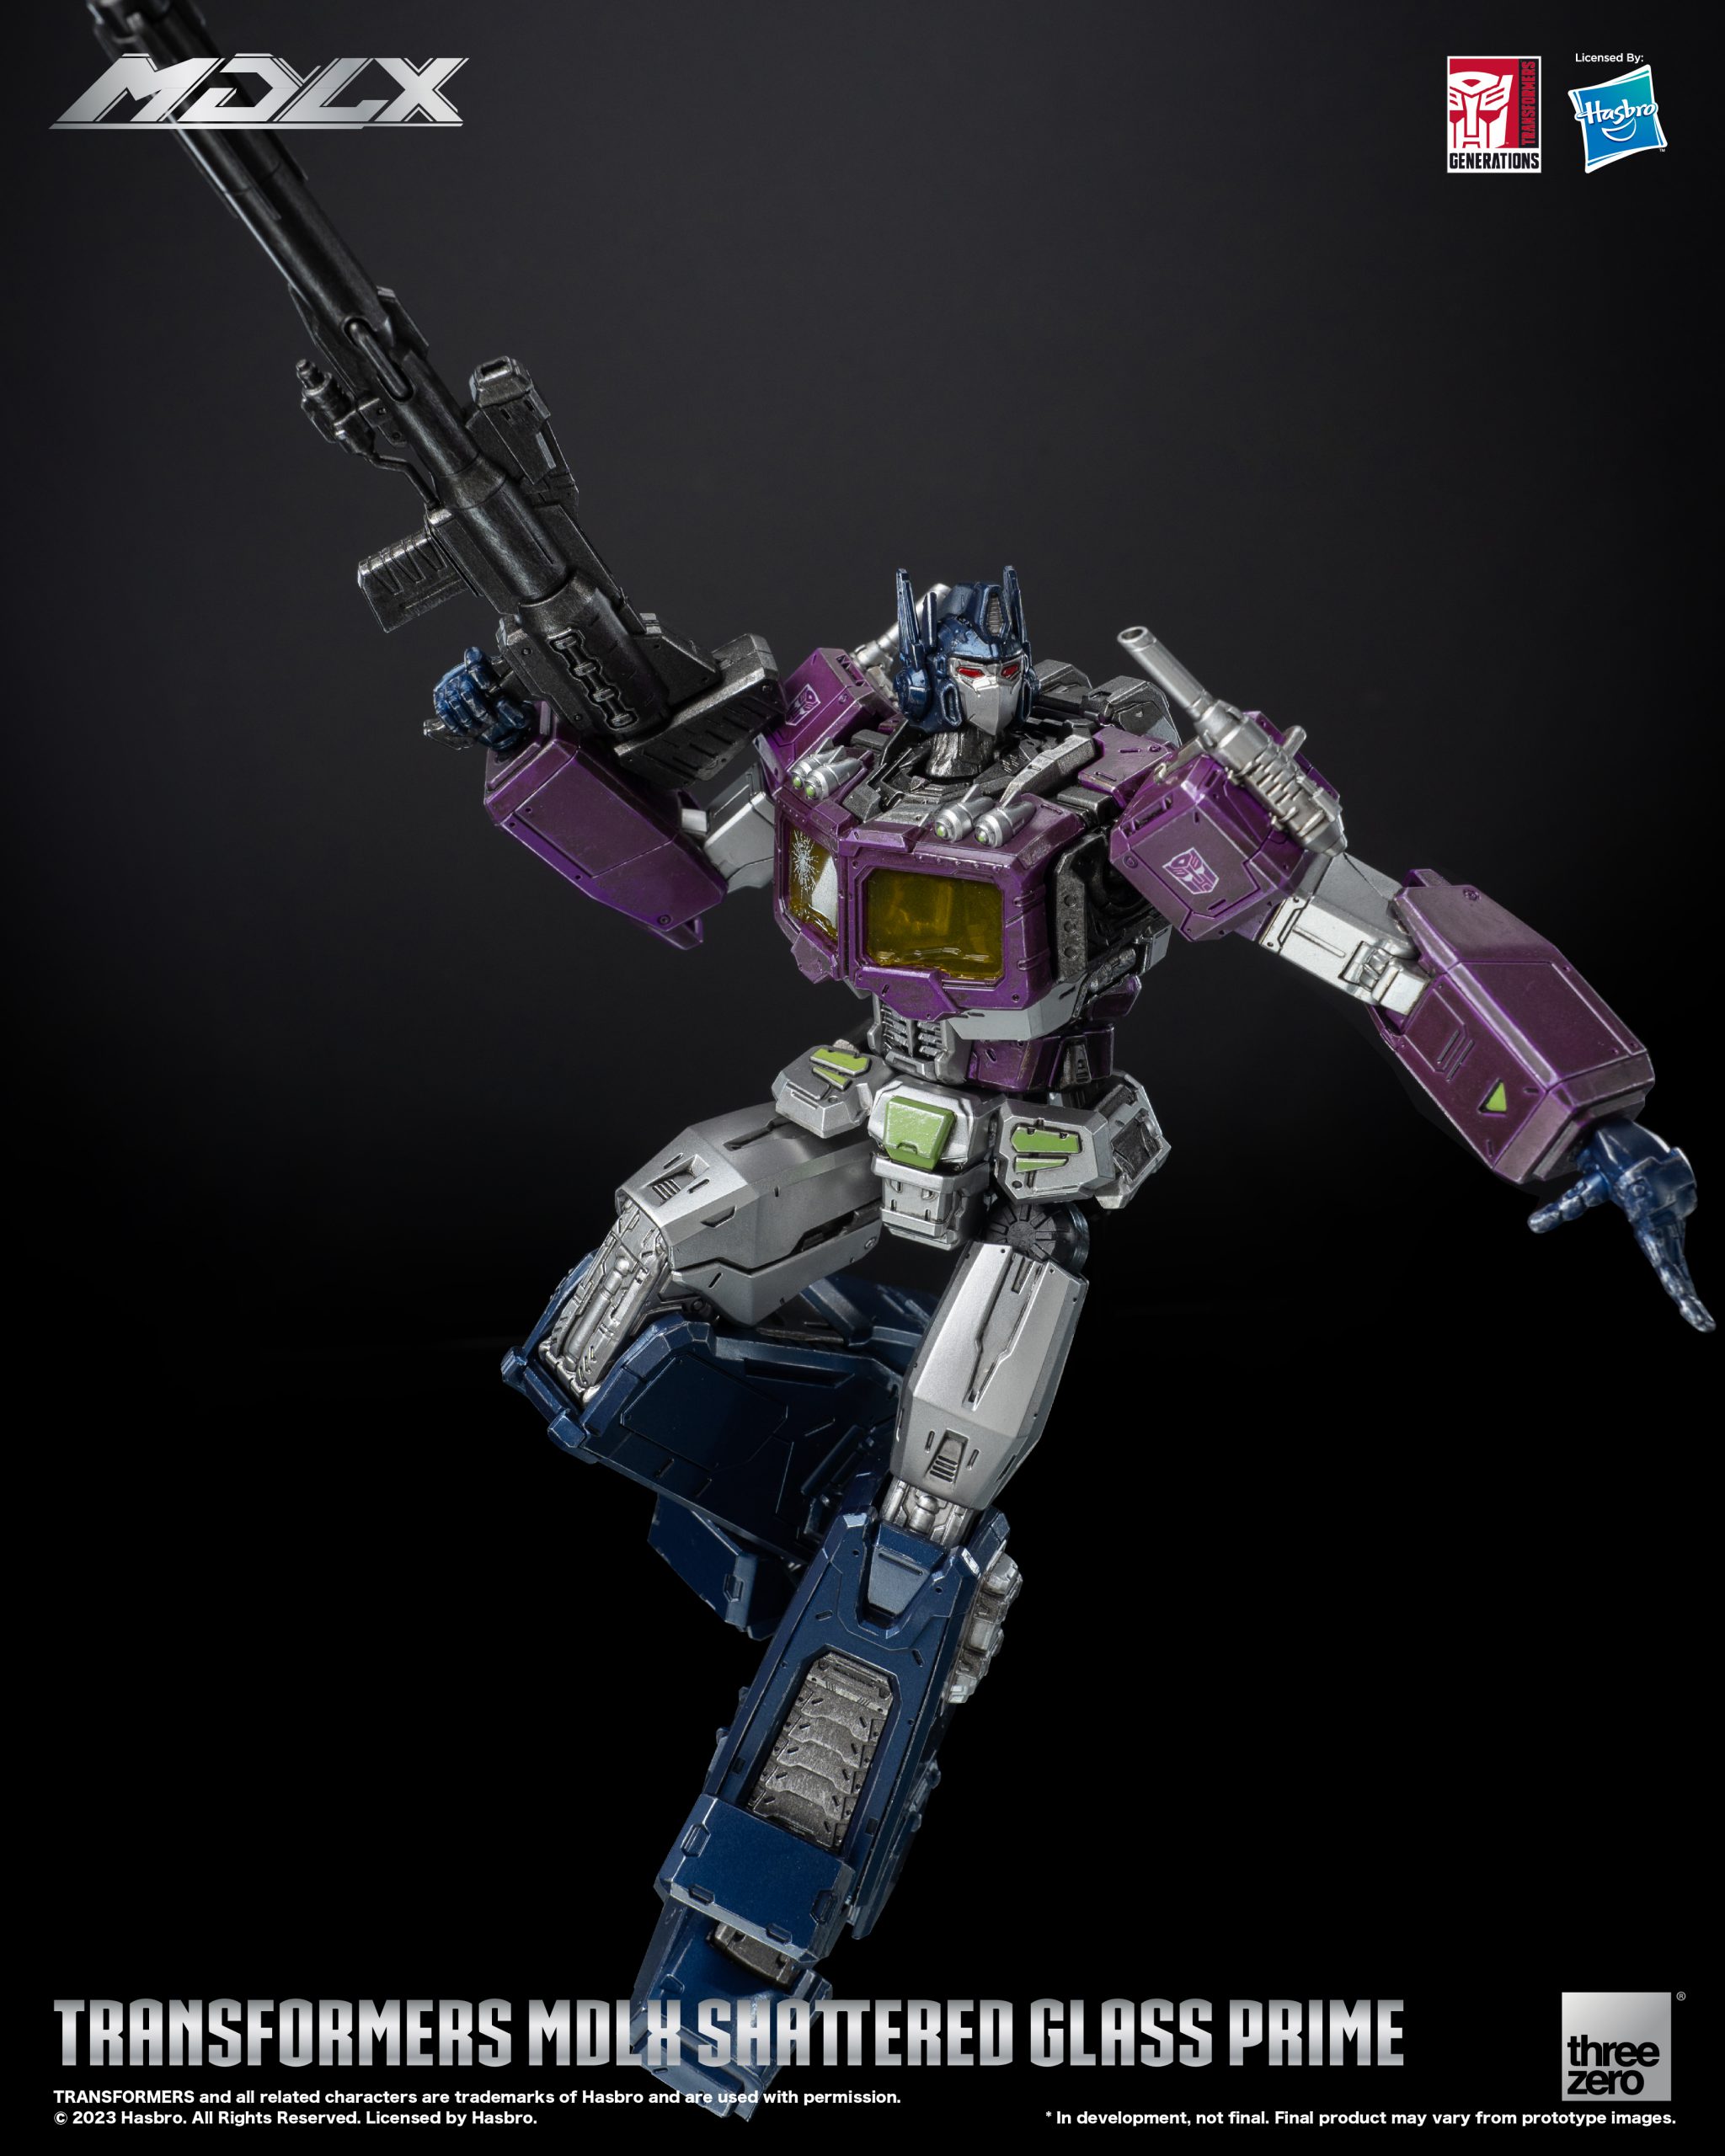 Transformers, MDLX Shattered Glass Optimus Prime